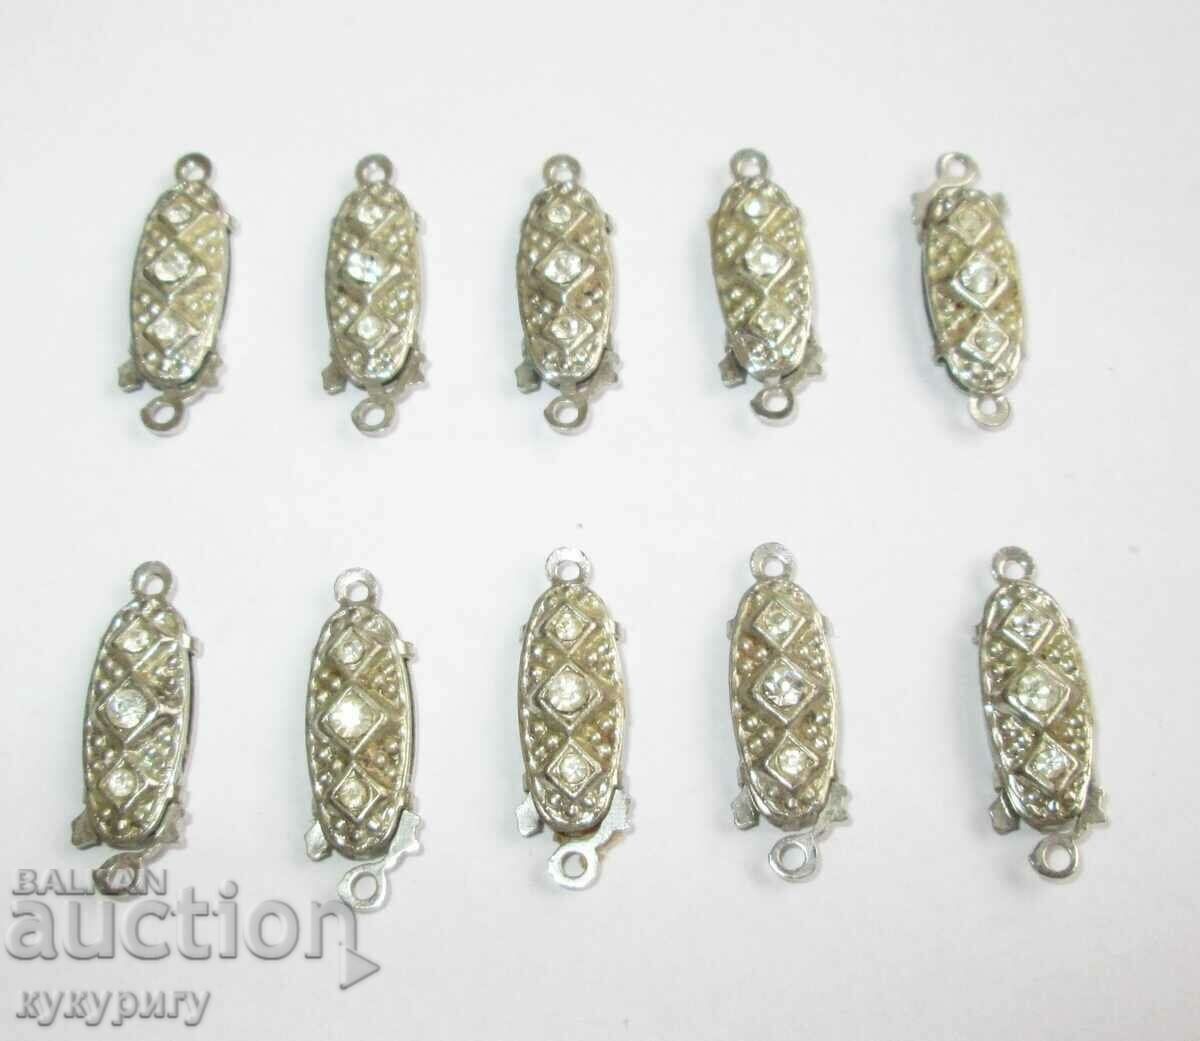 Lot of 10 vintage Art Deco clasps for jewelry necklace